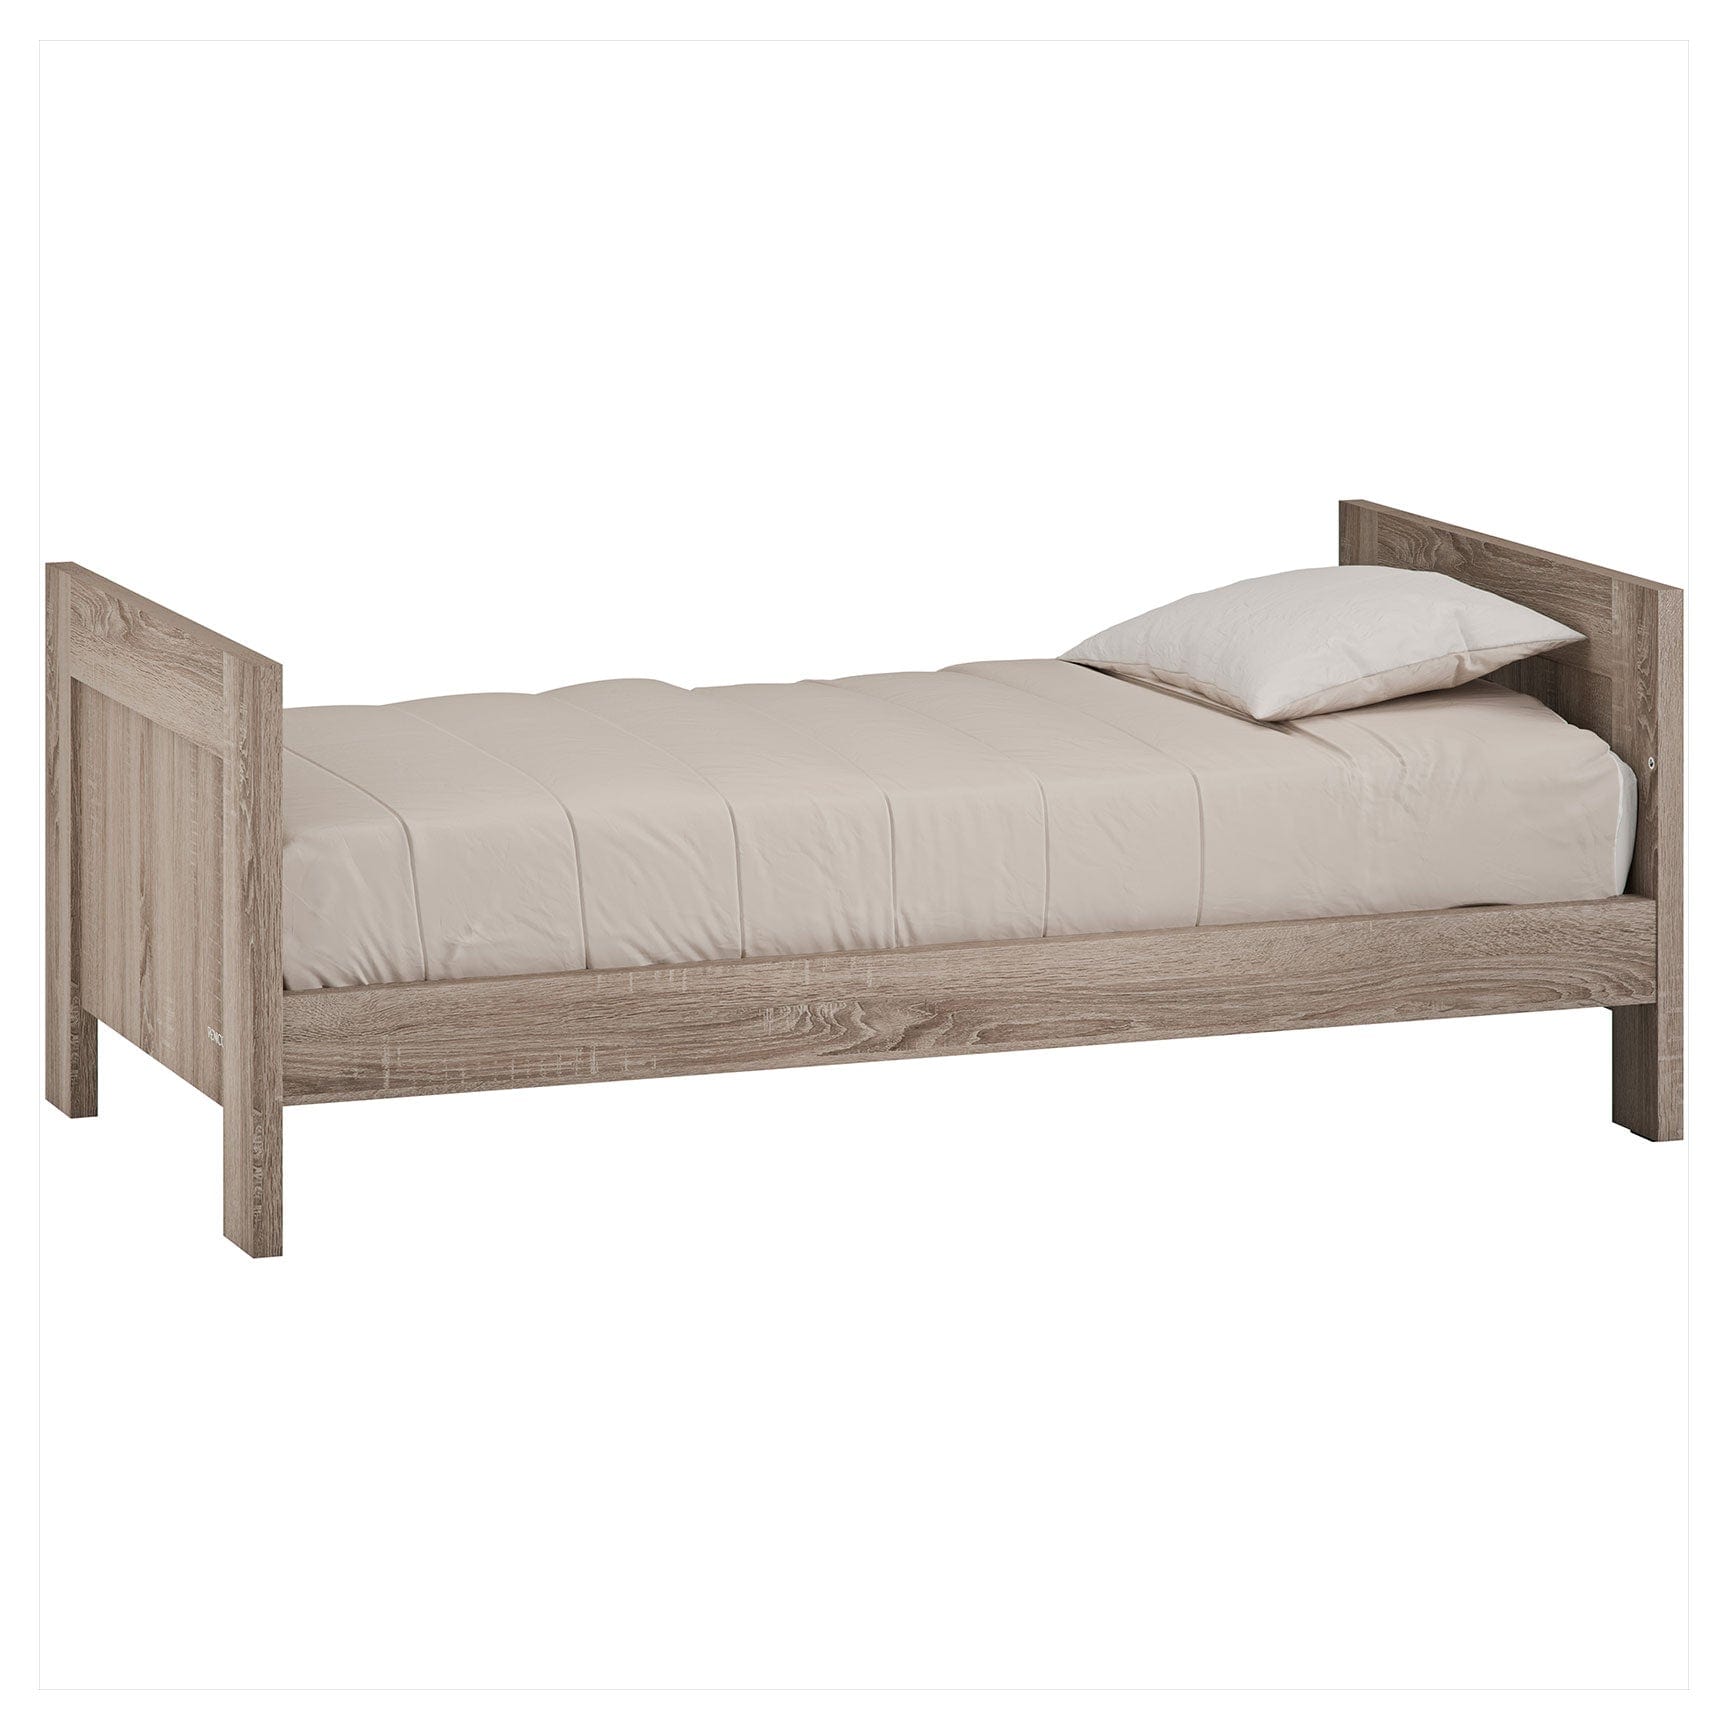 Venicci Forenzo Truffle Oak Cot Bed with Drawer in Truffle Oak Cot Beds